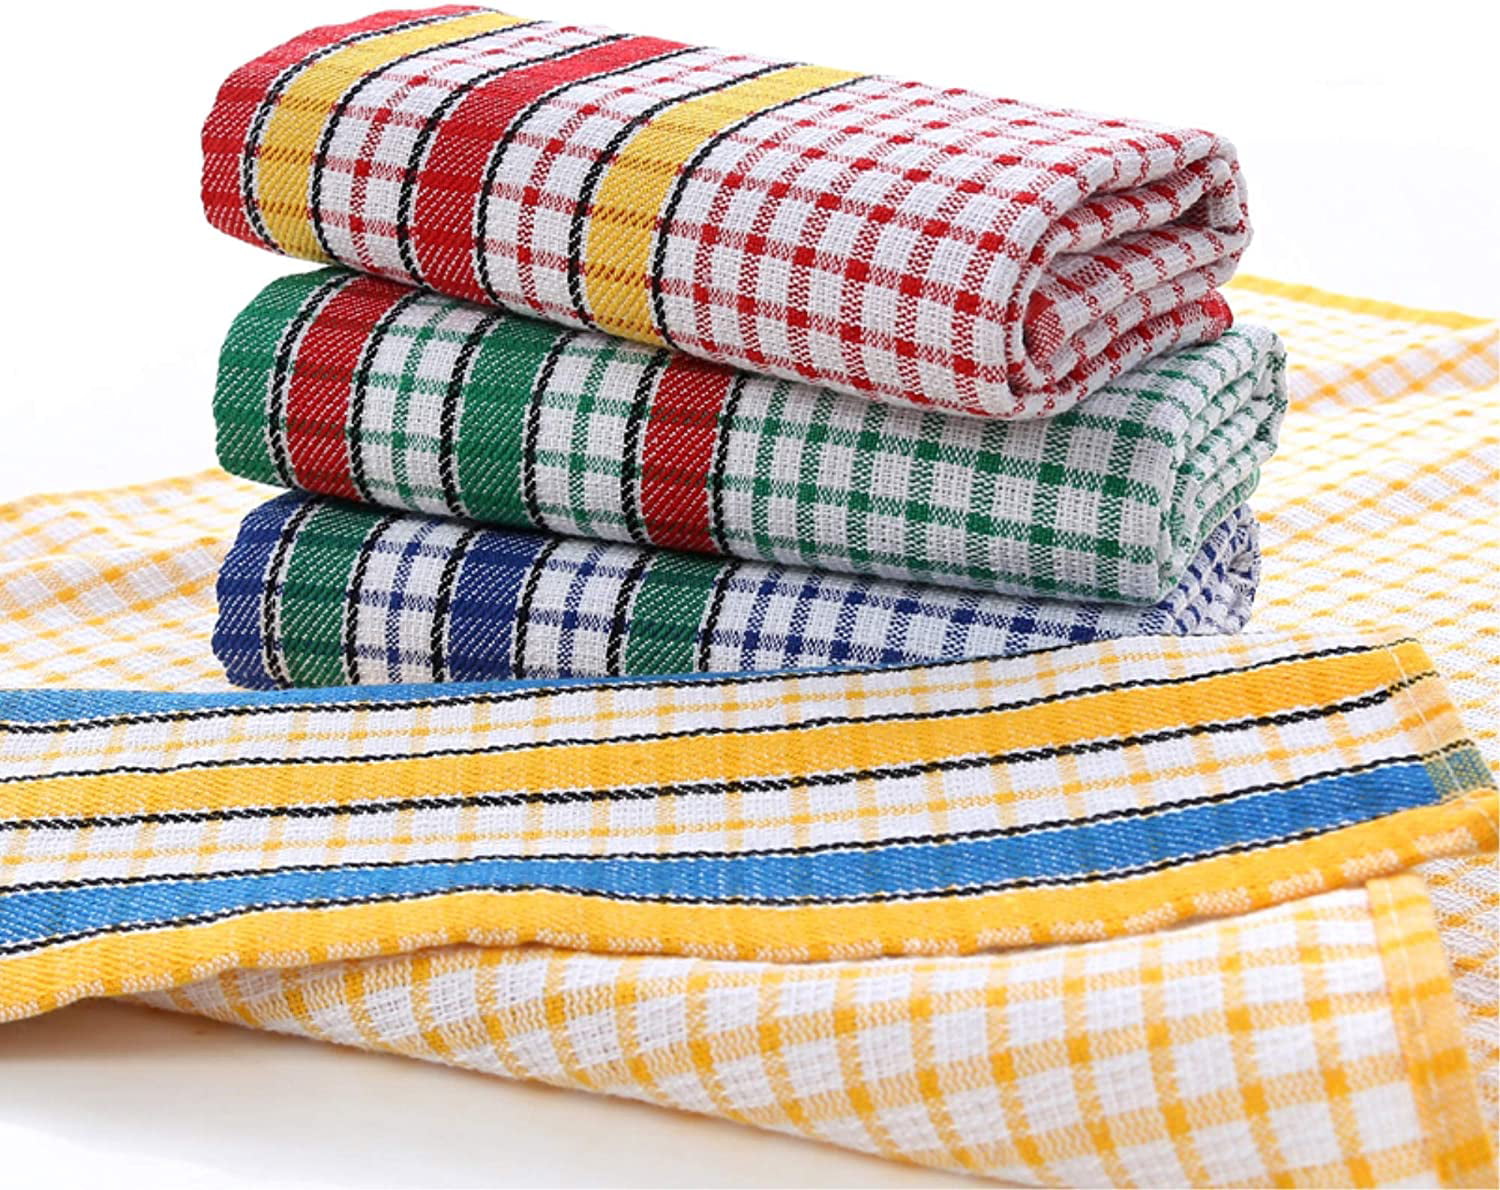  LAZI Kitchen Dish Towels, 16 Inch x 25 Inch Bulk Cotton Kitchen  Towels, 6 Pack Dish Cloths for Dish Rags for Drying Dishes Clothes and Dish  Towels : Health & Household